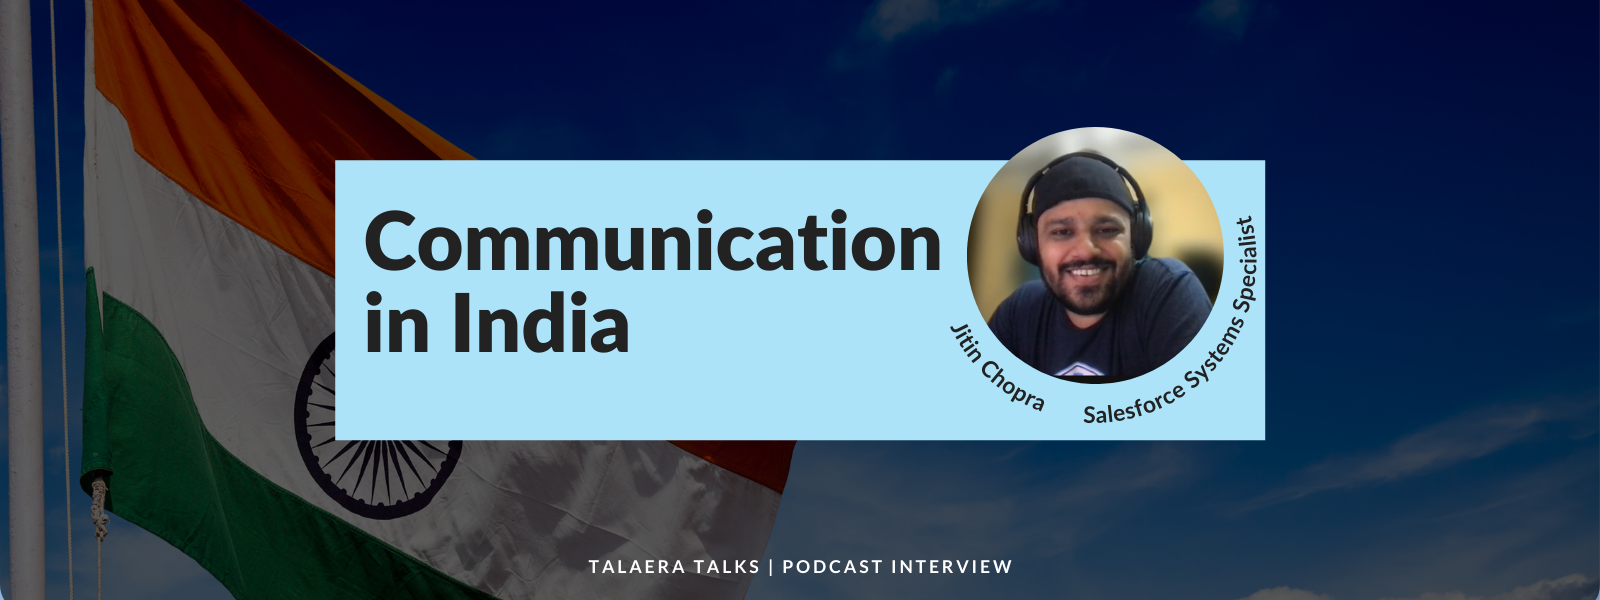 Communication in India - Talaera Talks Podcast Interview